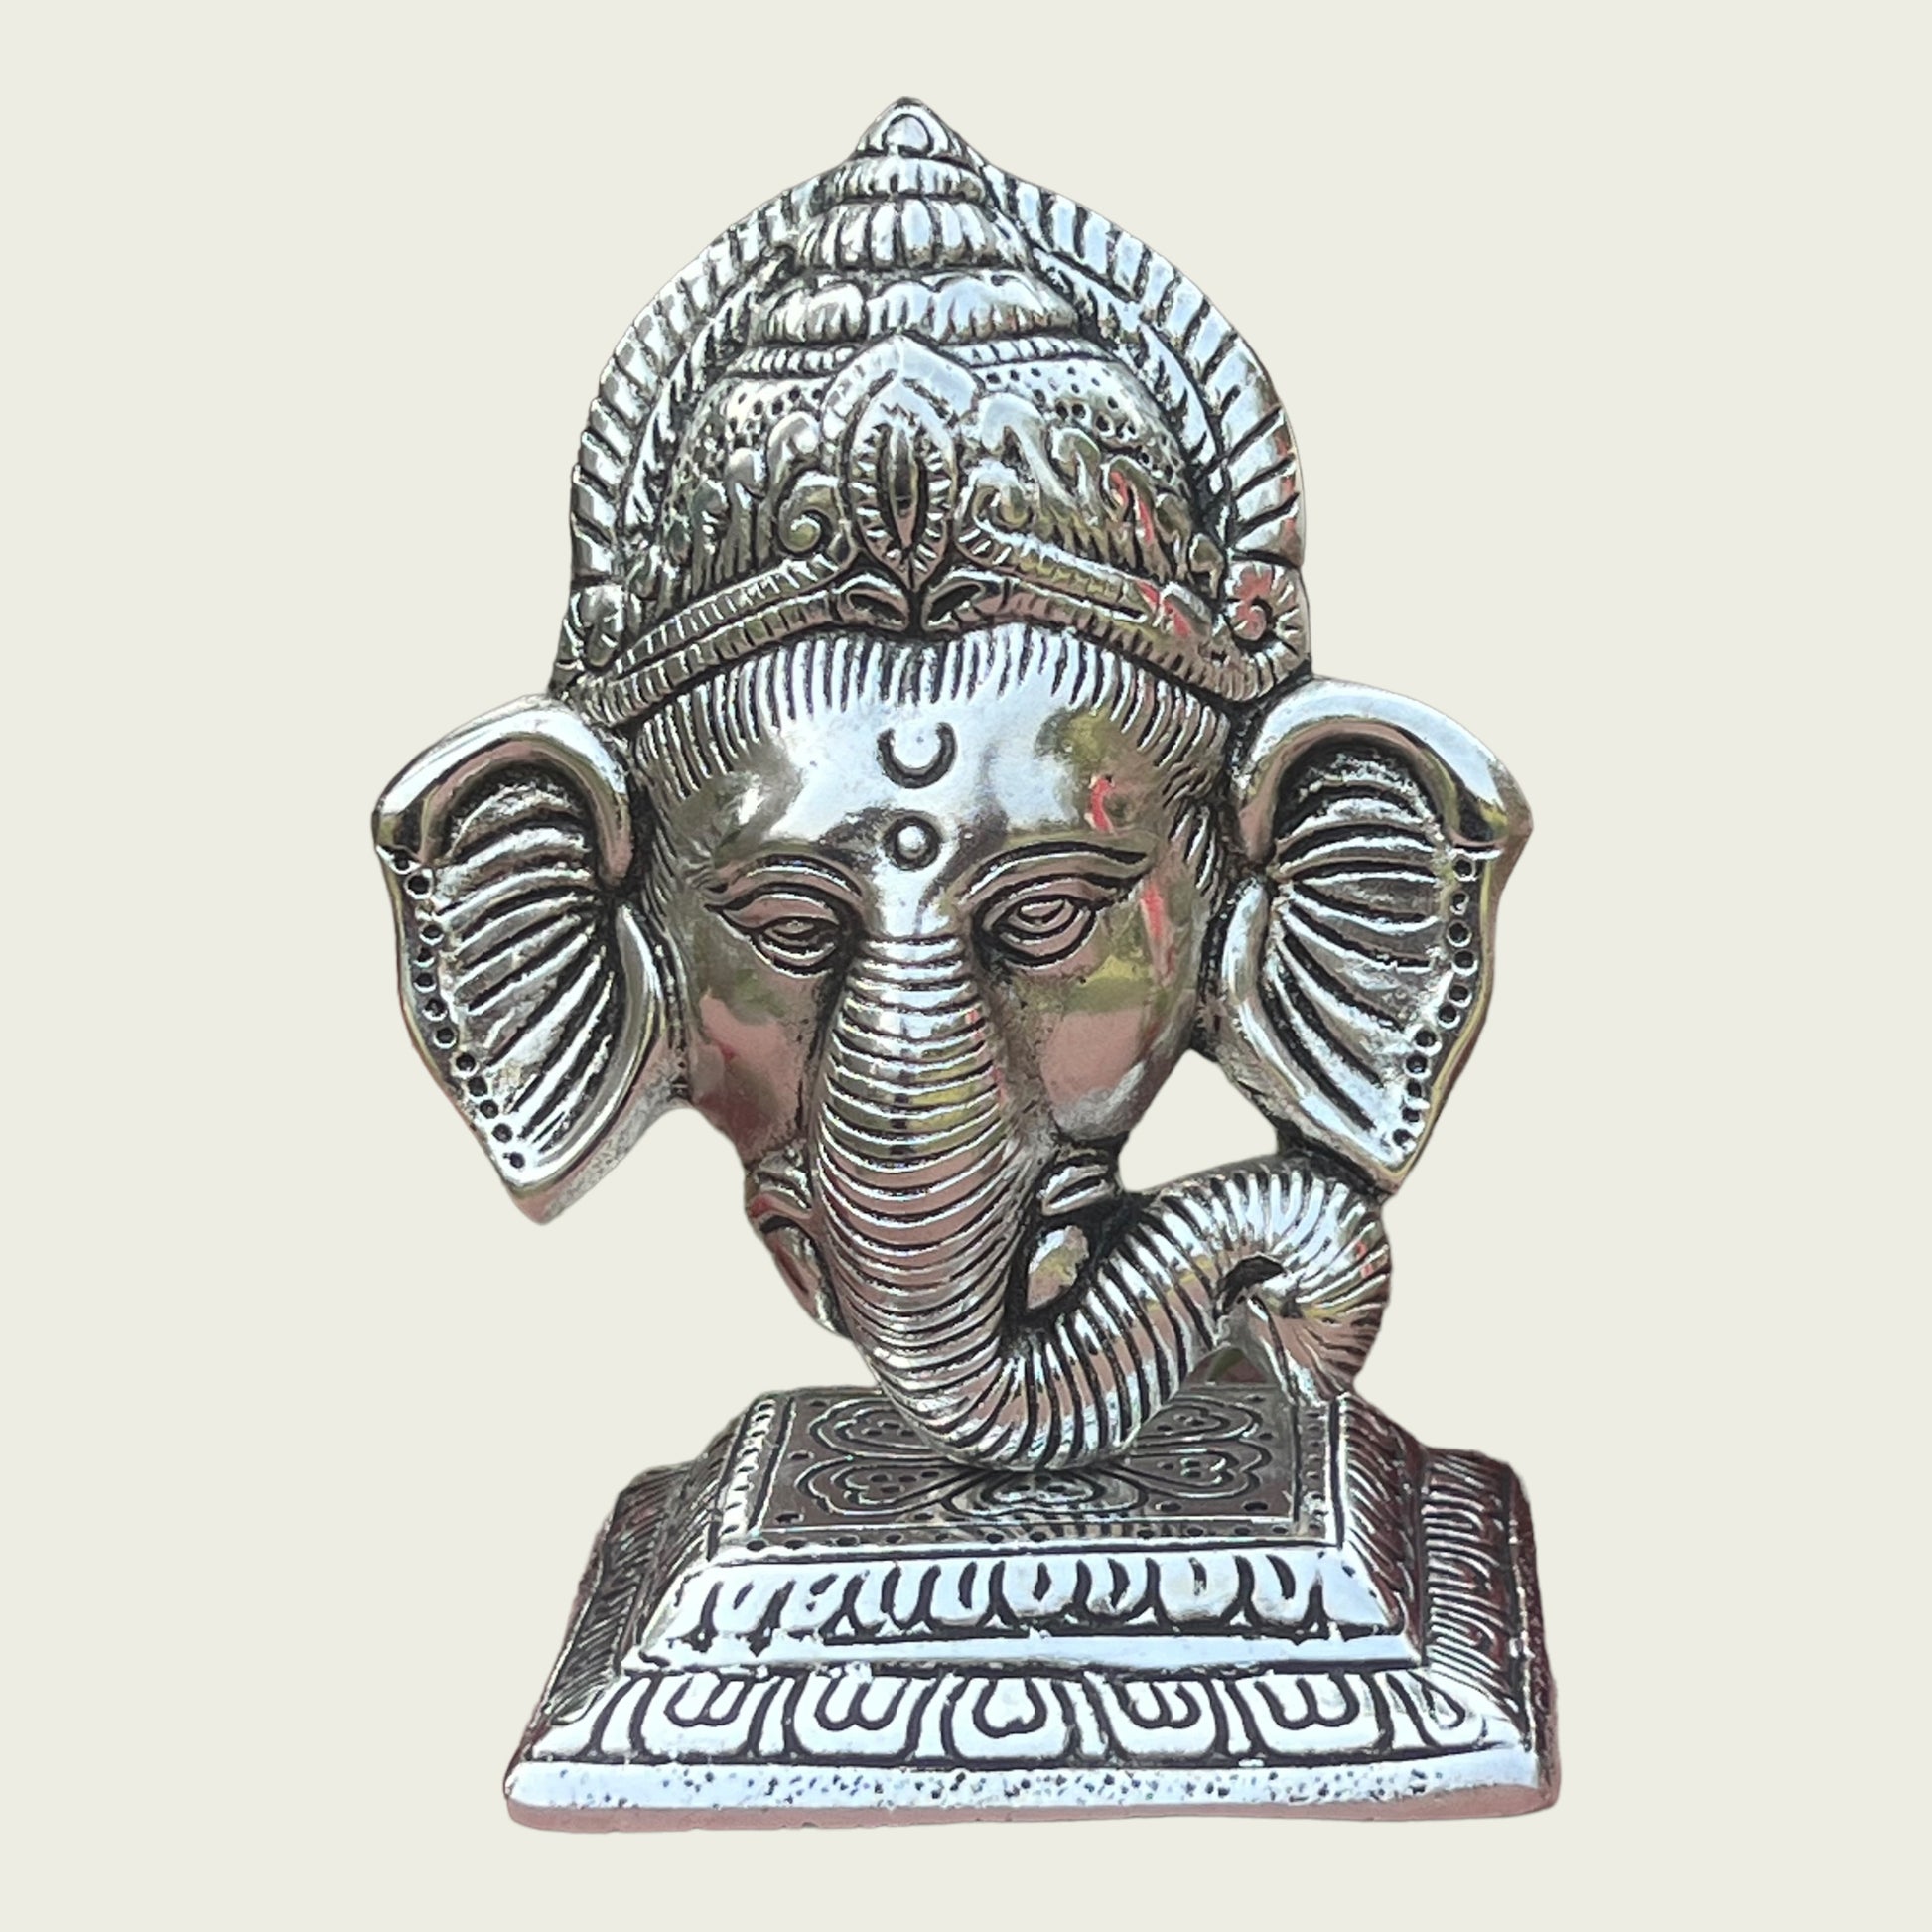 Image of Metal Stand With Ganesha Face  The Source India is an Indian Handicraft, Home Decor, Furnishing and Textiles Store. Based out of Hauz Khas Village New Delhi, each piece is carefully procured to allow the enhancement of India's Culture.